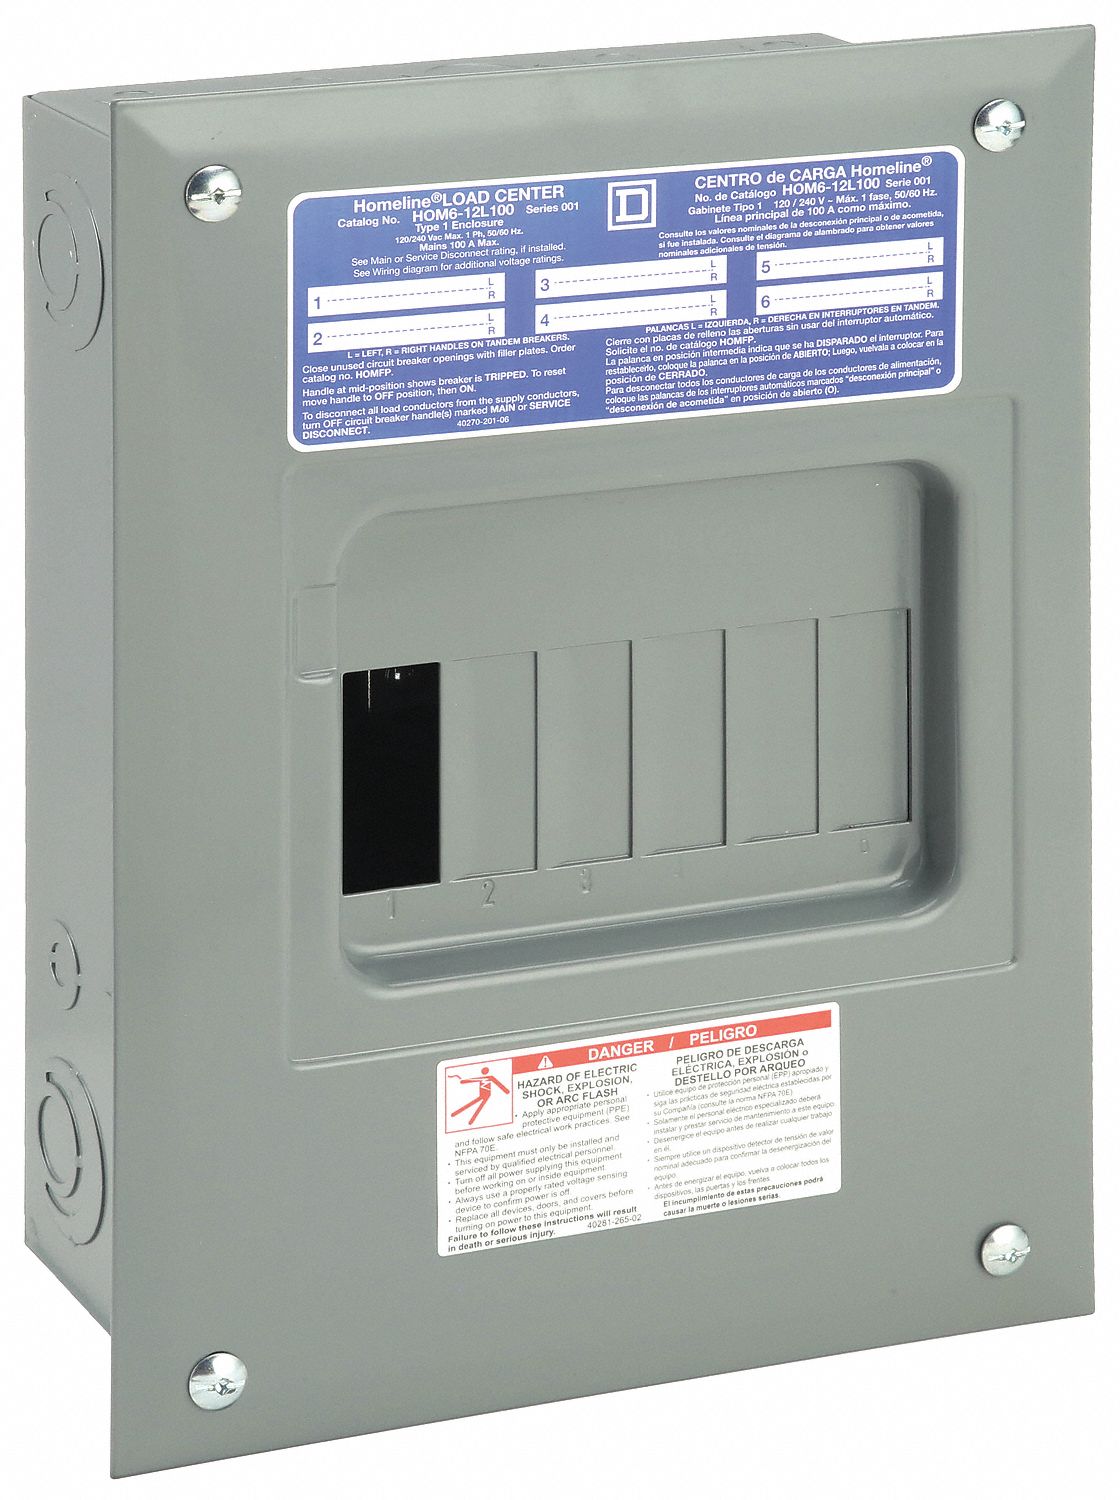 Electrical Boxes & Enclosures - Grainger Industrial Supply